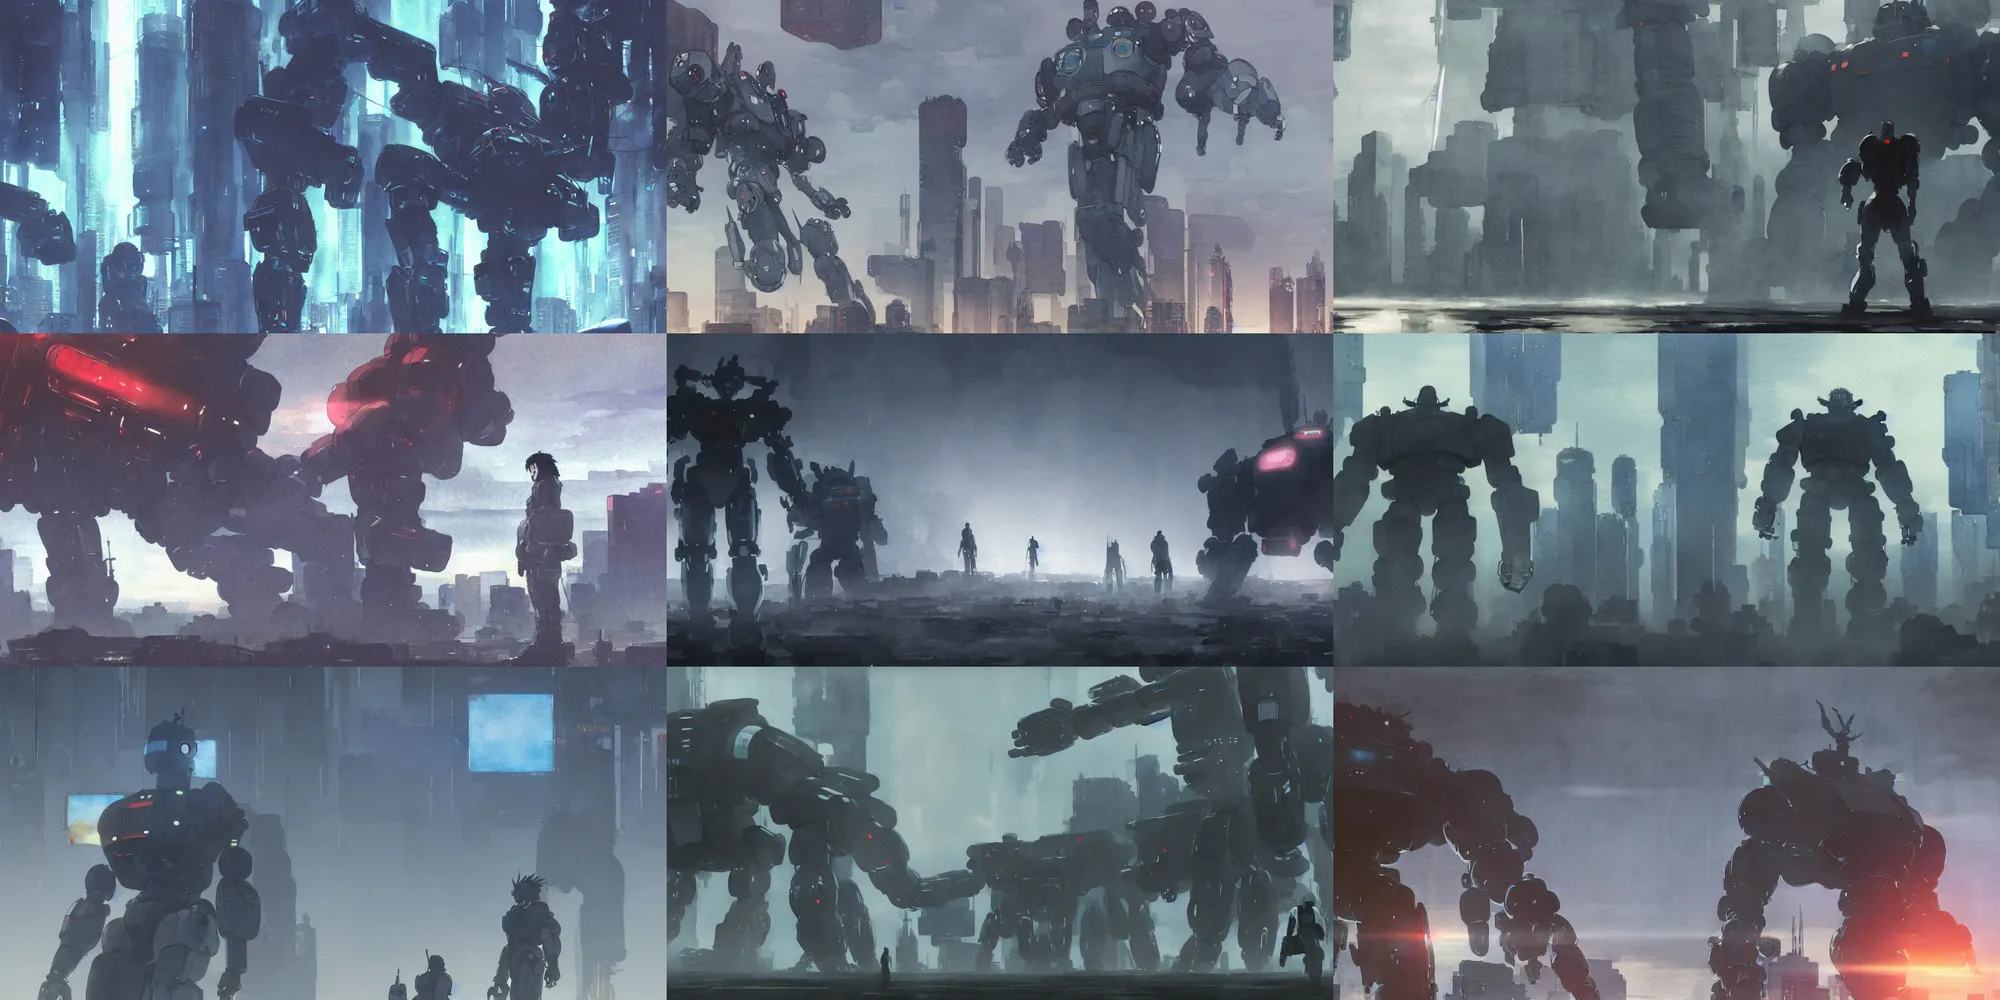 Prompt: incredible wide screenshot, ultrawide, simple watercolor, rough paper texture, katsuhiro otomo ghost in the shell movie scene, backlit distant shot of a giant robot invasion side view, robots fight, mecha, geiger, tubes, robot arms, robot legs, robot eyes, robot head, robot shadow, shadow of the colossus, robot crusher, robot stomp, panic, looking up, yellow parasol in deserted dusty shinjuku junk town, broken vending machines, bold graphic graffiti, old pawn shop, bright sun bleached ground, mud, fog, dust, windy, scary robot monster lurks in the background, ghost mask, teeth, animatronic, black smoke, pale beige sky, junk tv, texture, shell, brown mud, dust, tangled overhead wires, telephone pole, dusty, dry, pencil marks, genius party,shinjuku, koju morimoto, katsuya terada, masamune shirow, tatsuyuki tanaka hd, 4k, remaster, dynamic camera angle, deep 3 point perspective, fish eye, dynamic scene